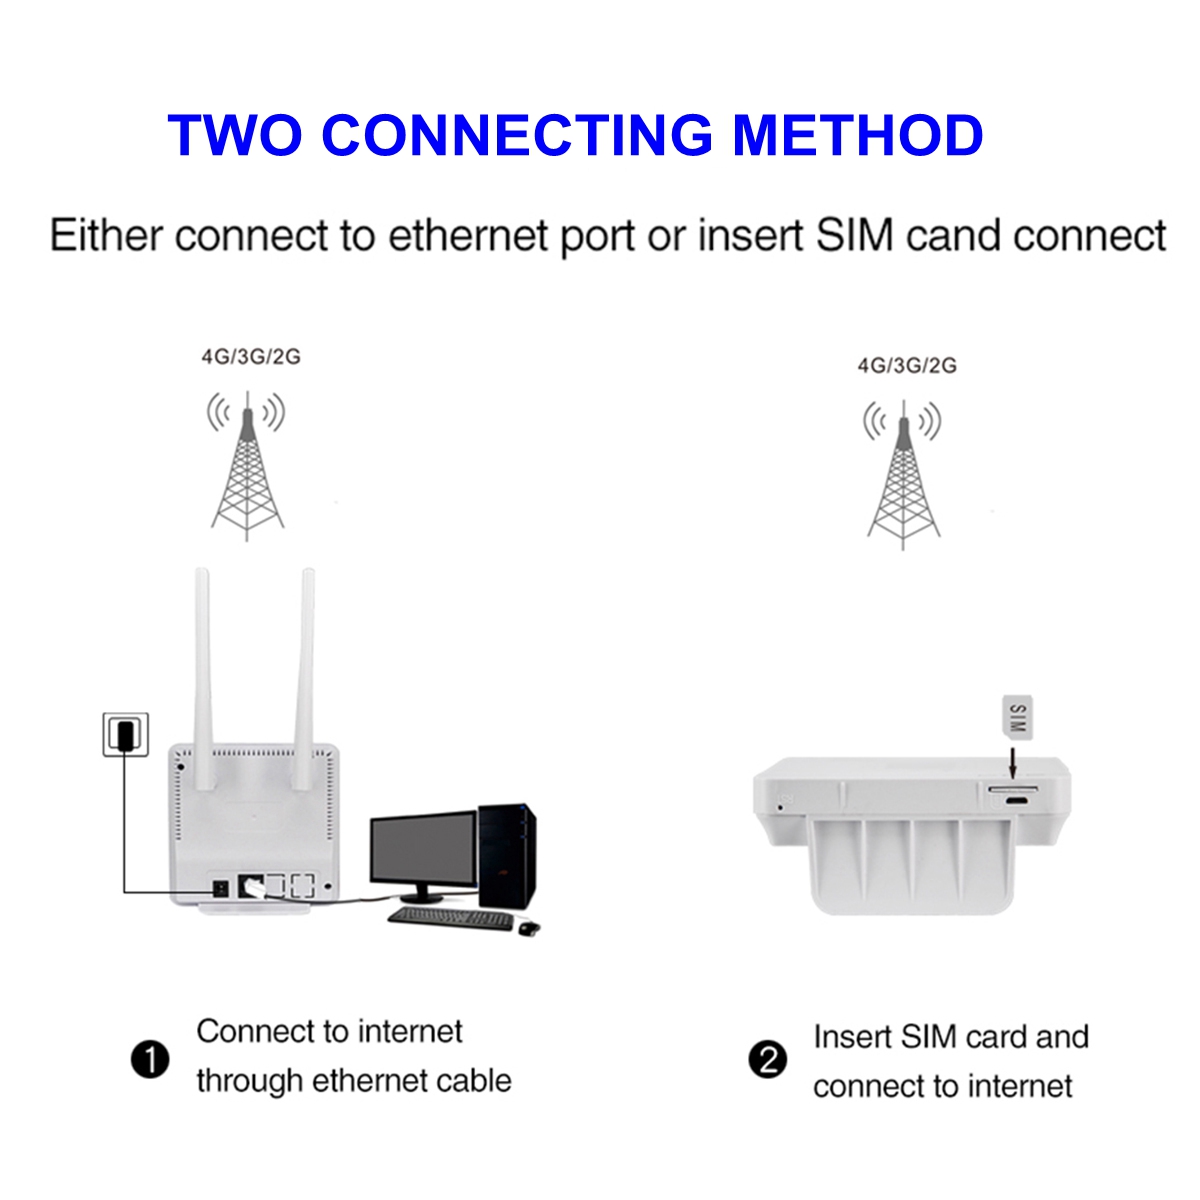 24G-4G-LTE-Wifi-Router-CPE-Router-Support-for-20-Users-with-SIM-Card-Slot-Wirelss-Wired-Router-1424481